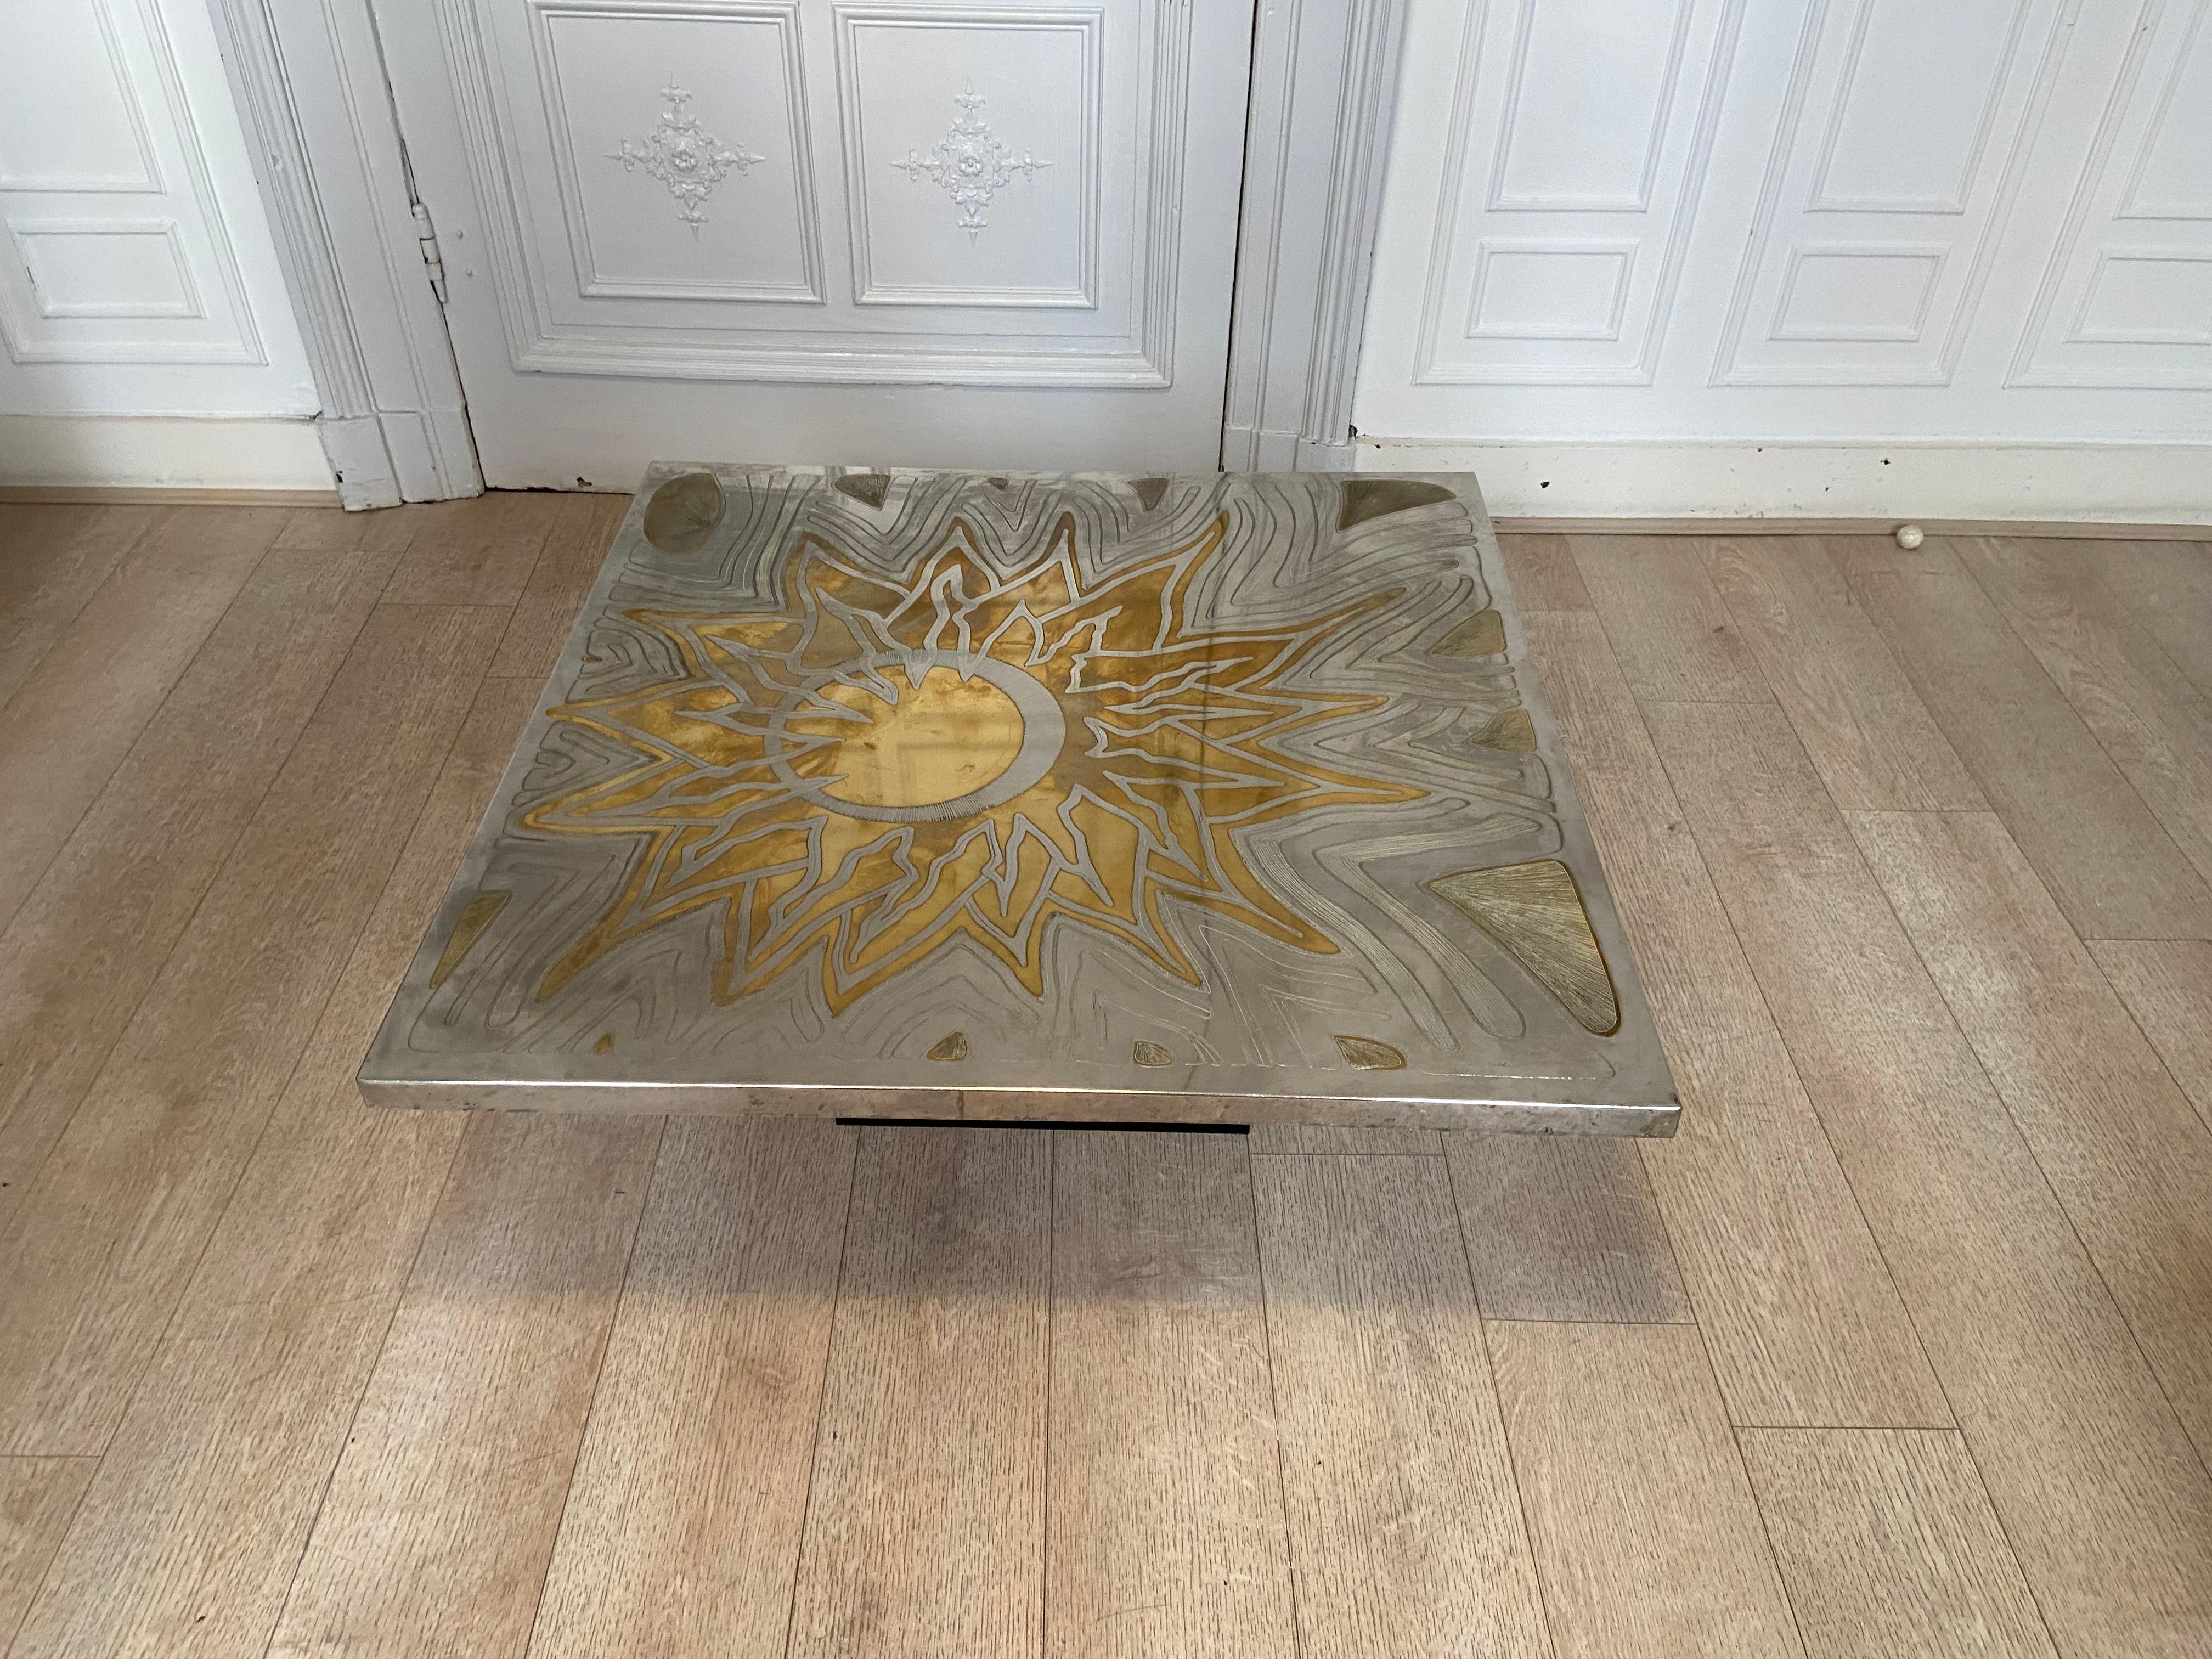 Brass coffee table engraved with solar motif signed by designer christian krekels. Good vintage condition.